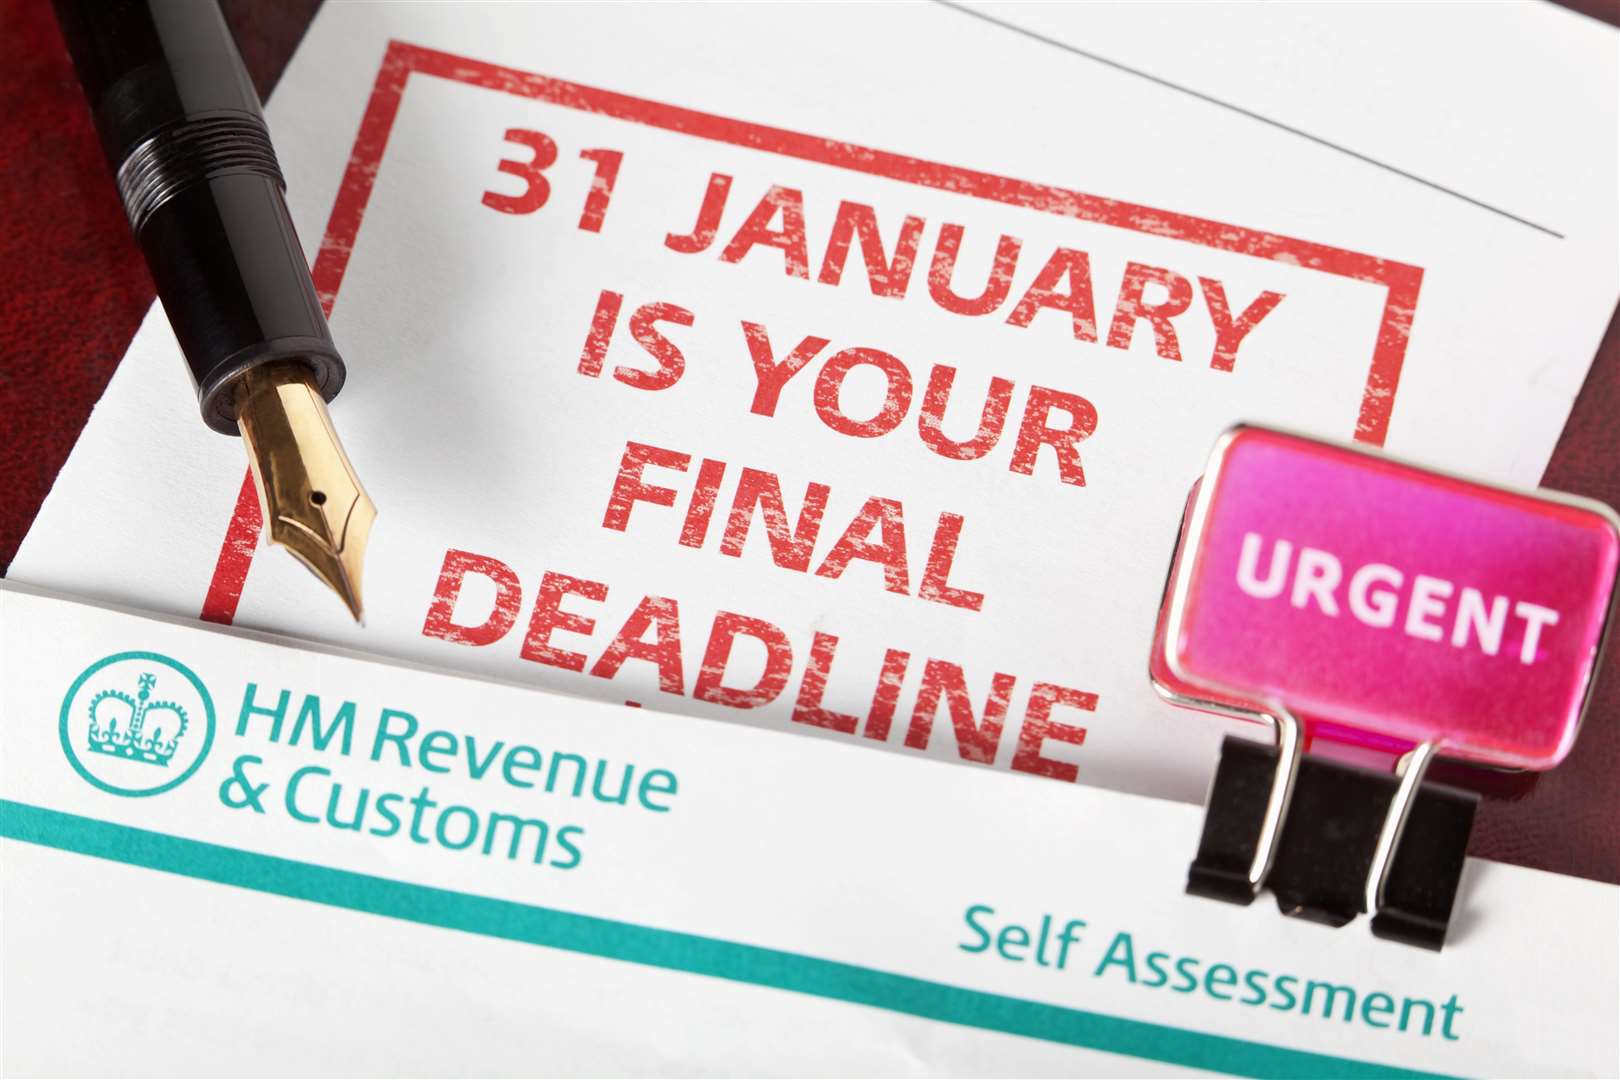 Taxpayers who need to complete a self-assessment tax return need to do so by January 31